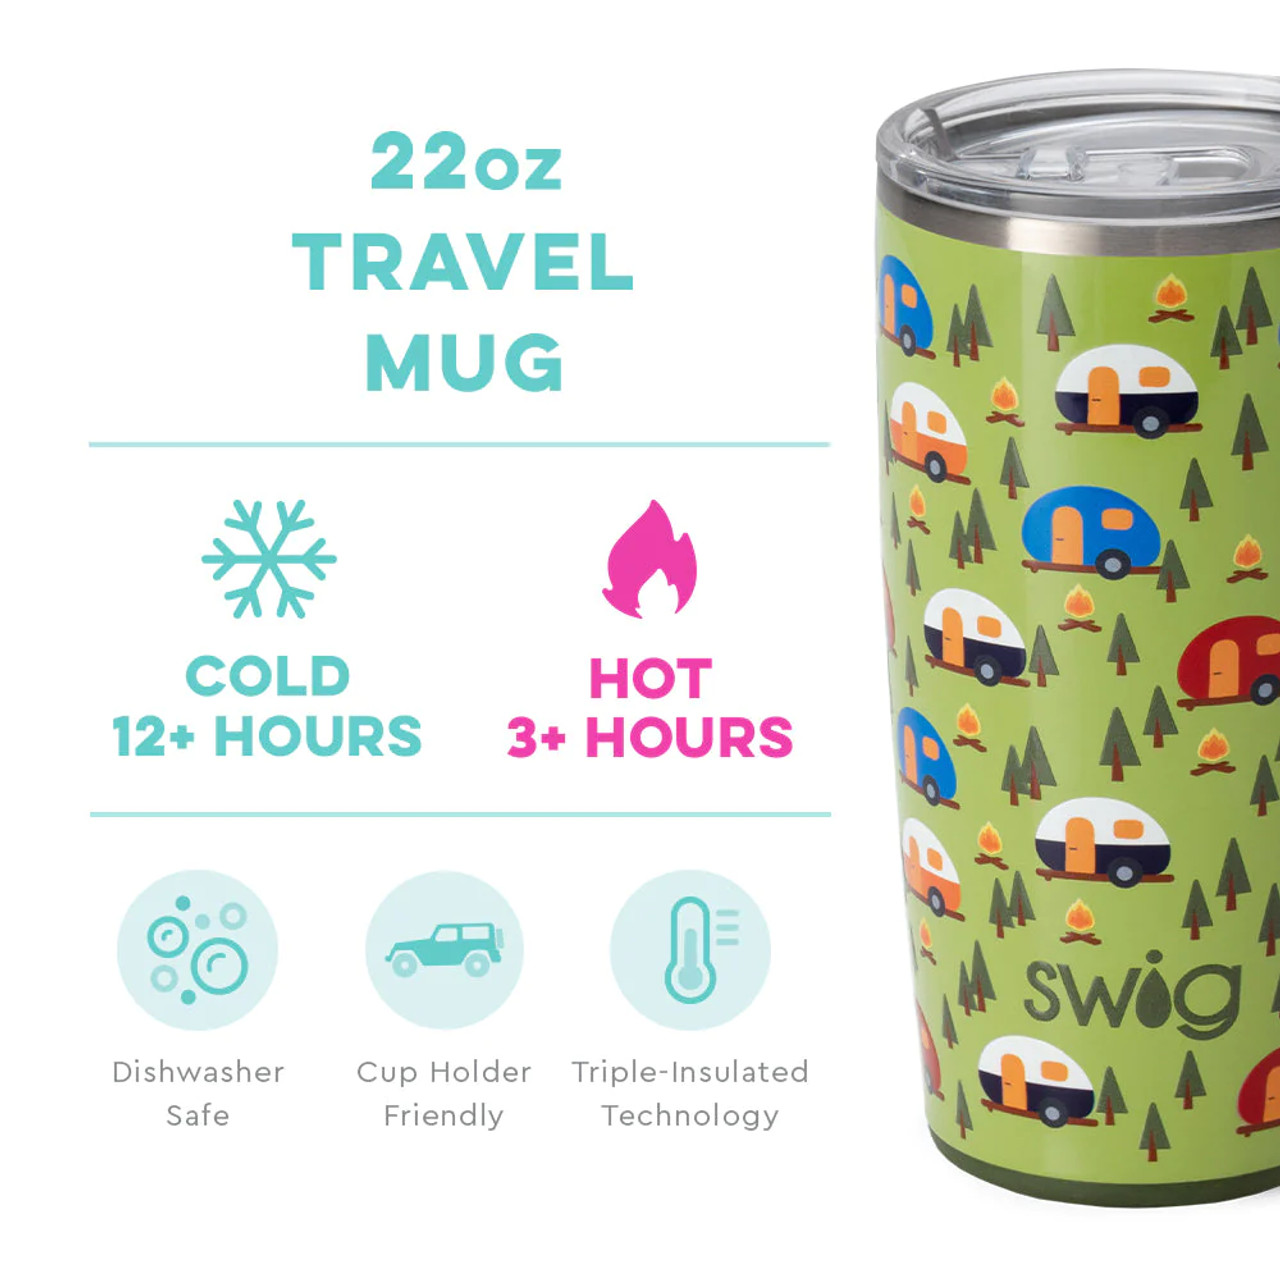 https://cdn11.bigcommerce.com/s-e3nb6xi/images/stencil/1280x1280/products/25256/127010/swig-life-signature-22oz-insulated-stainless-steel-travel-mug-with-handle-happy-camper-temp-info__61485.1689105434.jpg?c=2